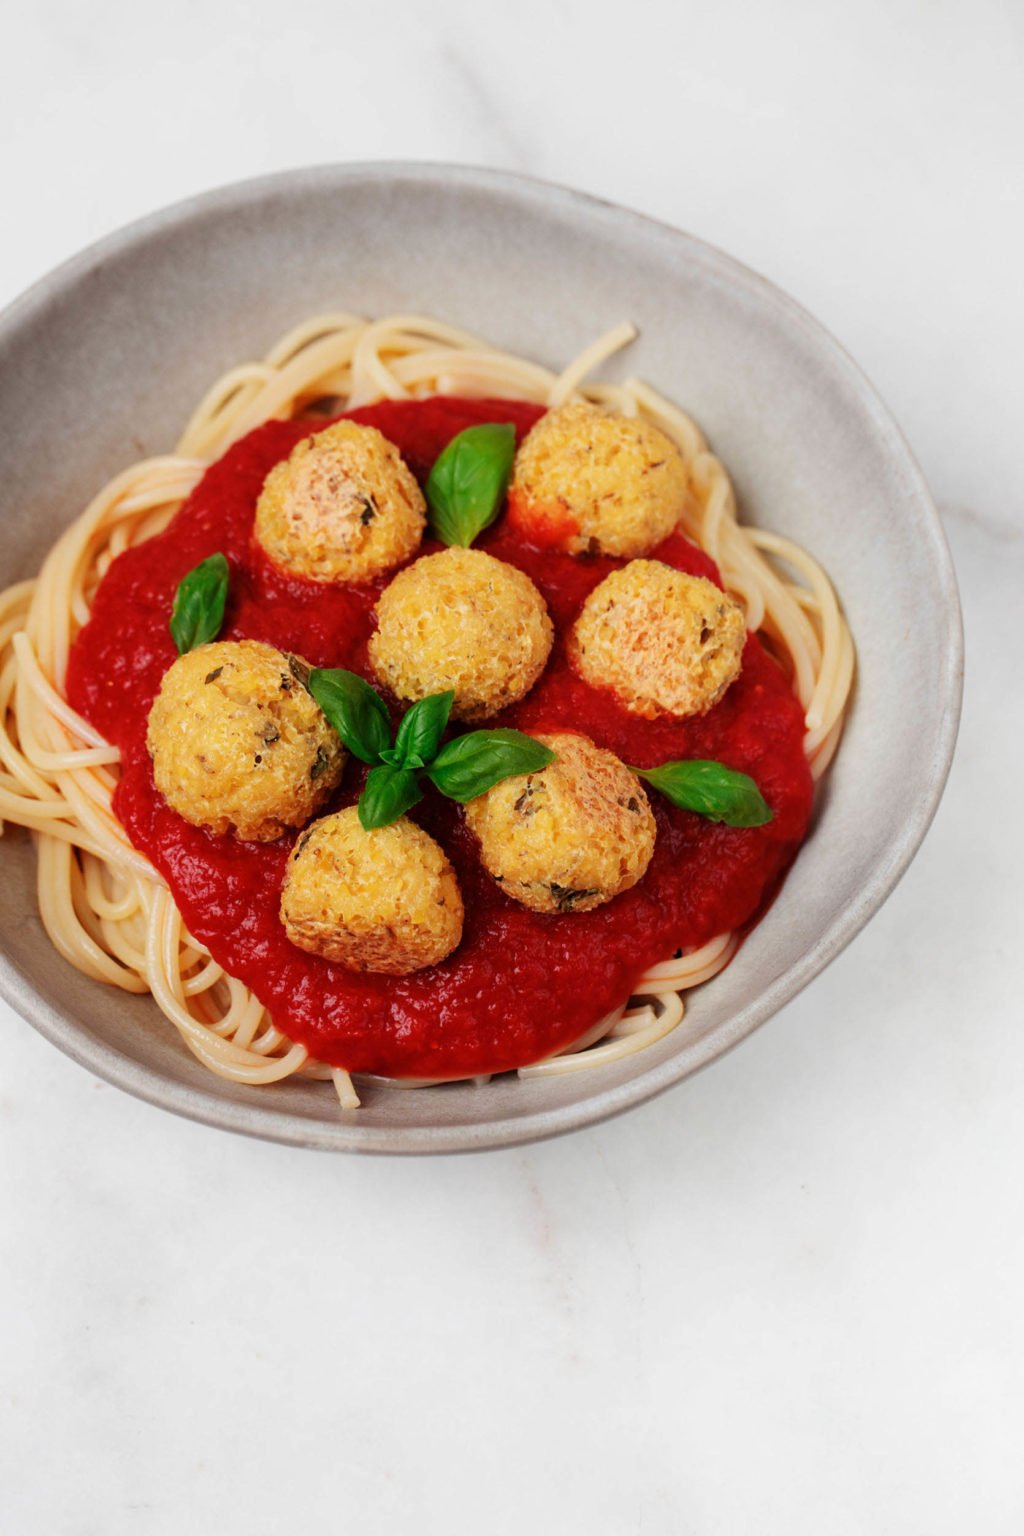 A bowl of tofu bulgur meatballs has been smothered by tomato sauce and garnished with green basil leaves.